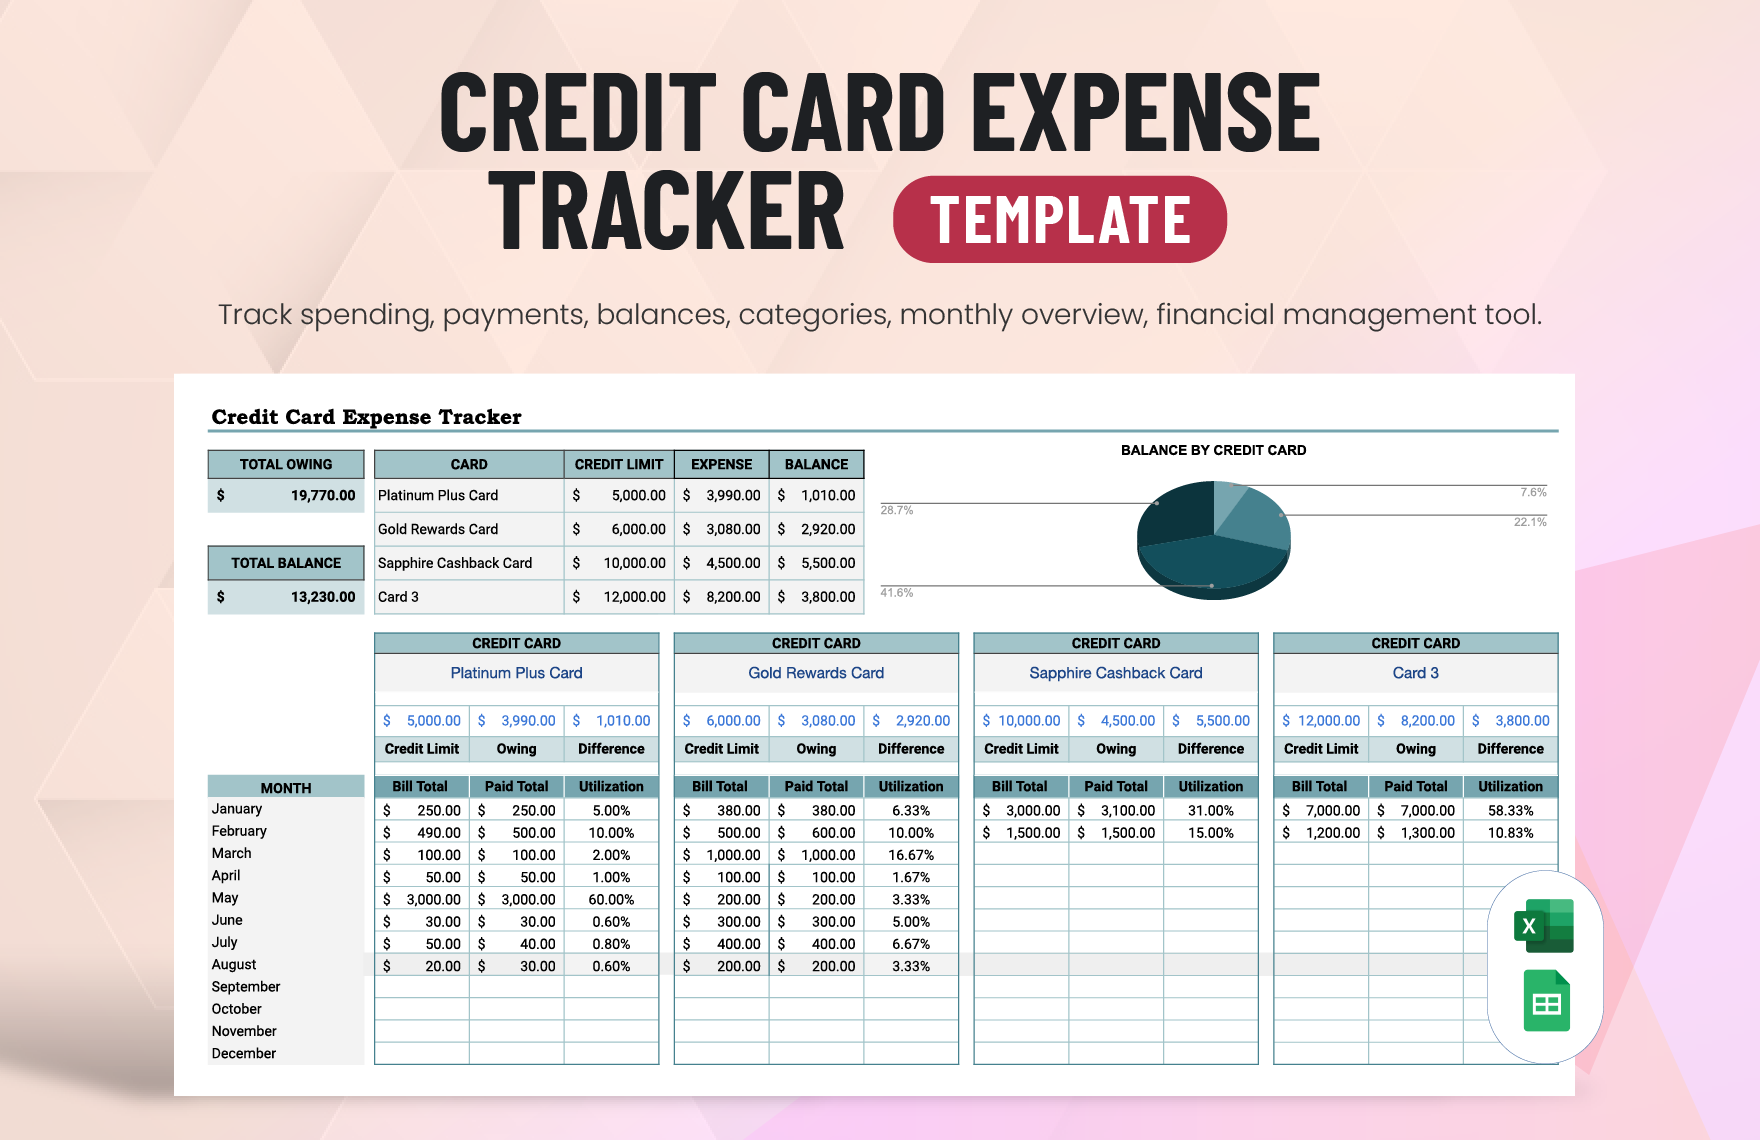 Credit Card Expense Tracker Template